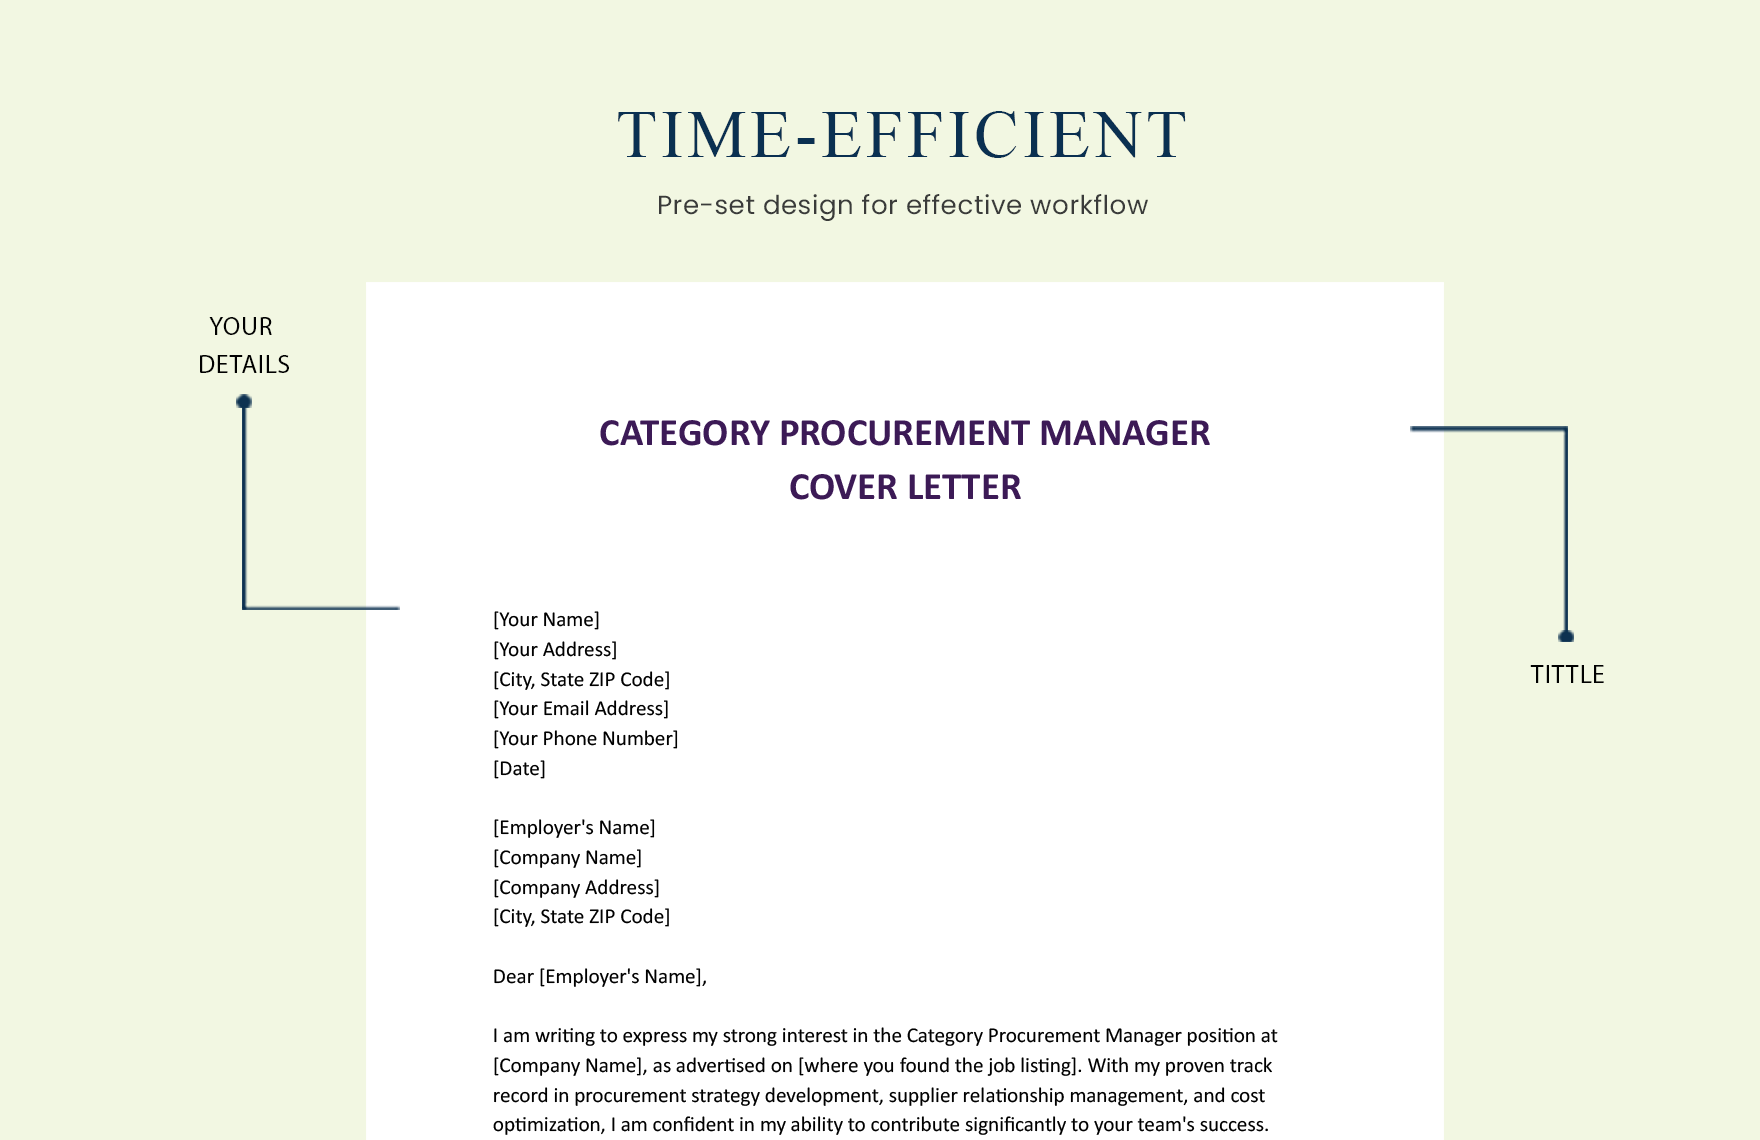 Category Procurement Manager Cover Letter